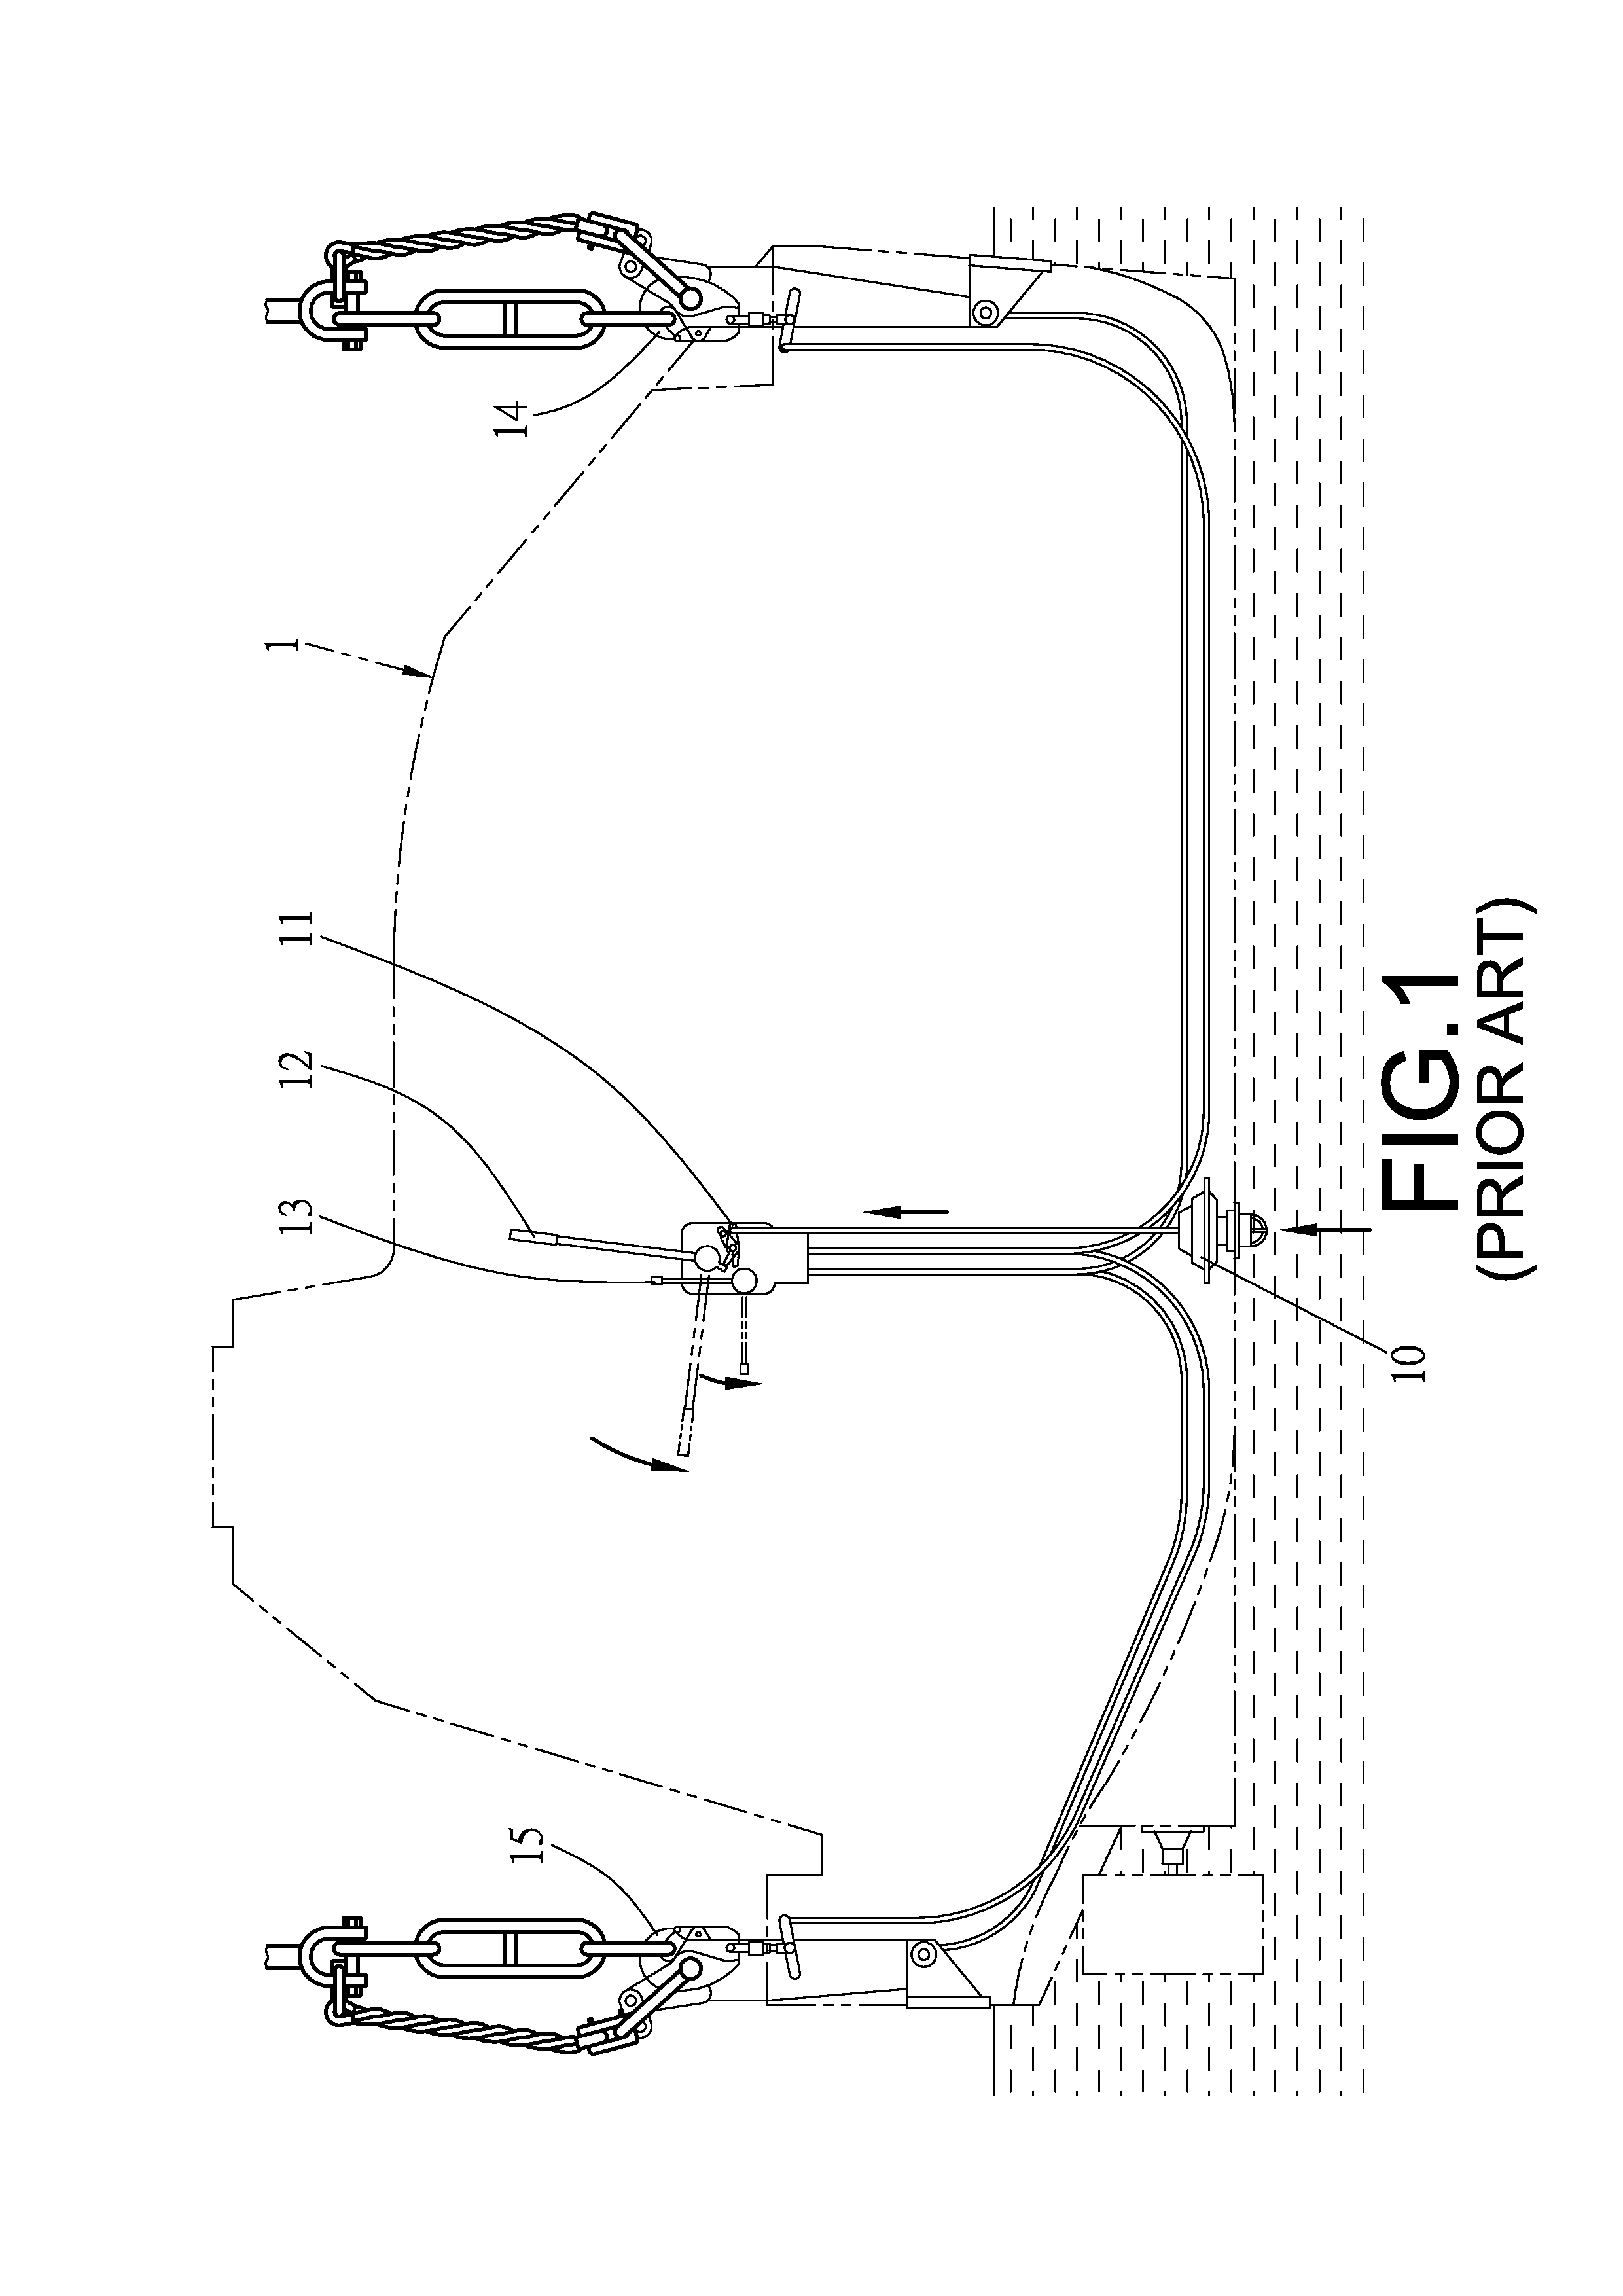 Testing apparatus for hydrostatic interlock of a lifeboat